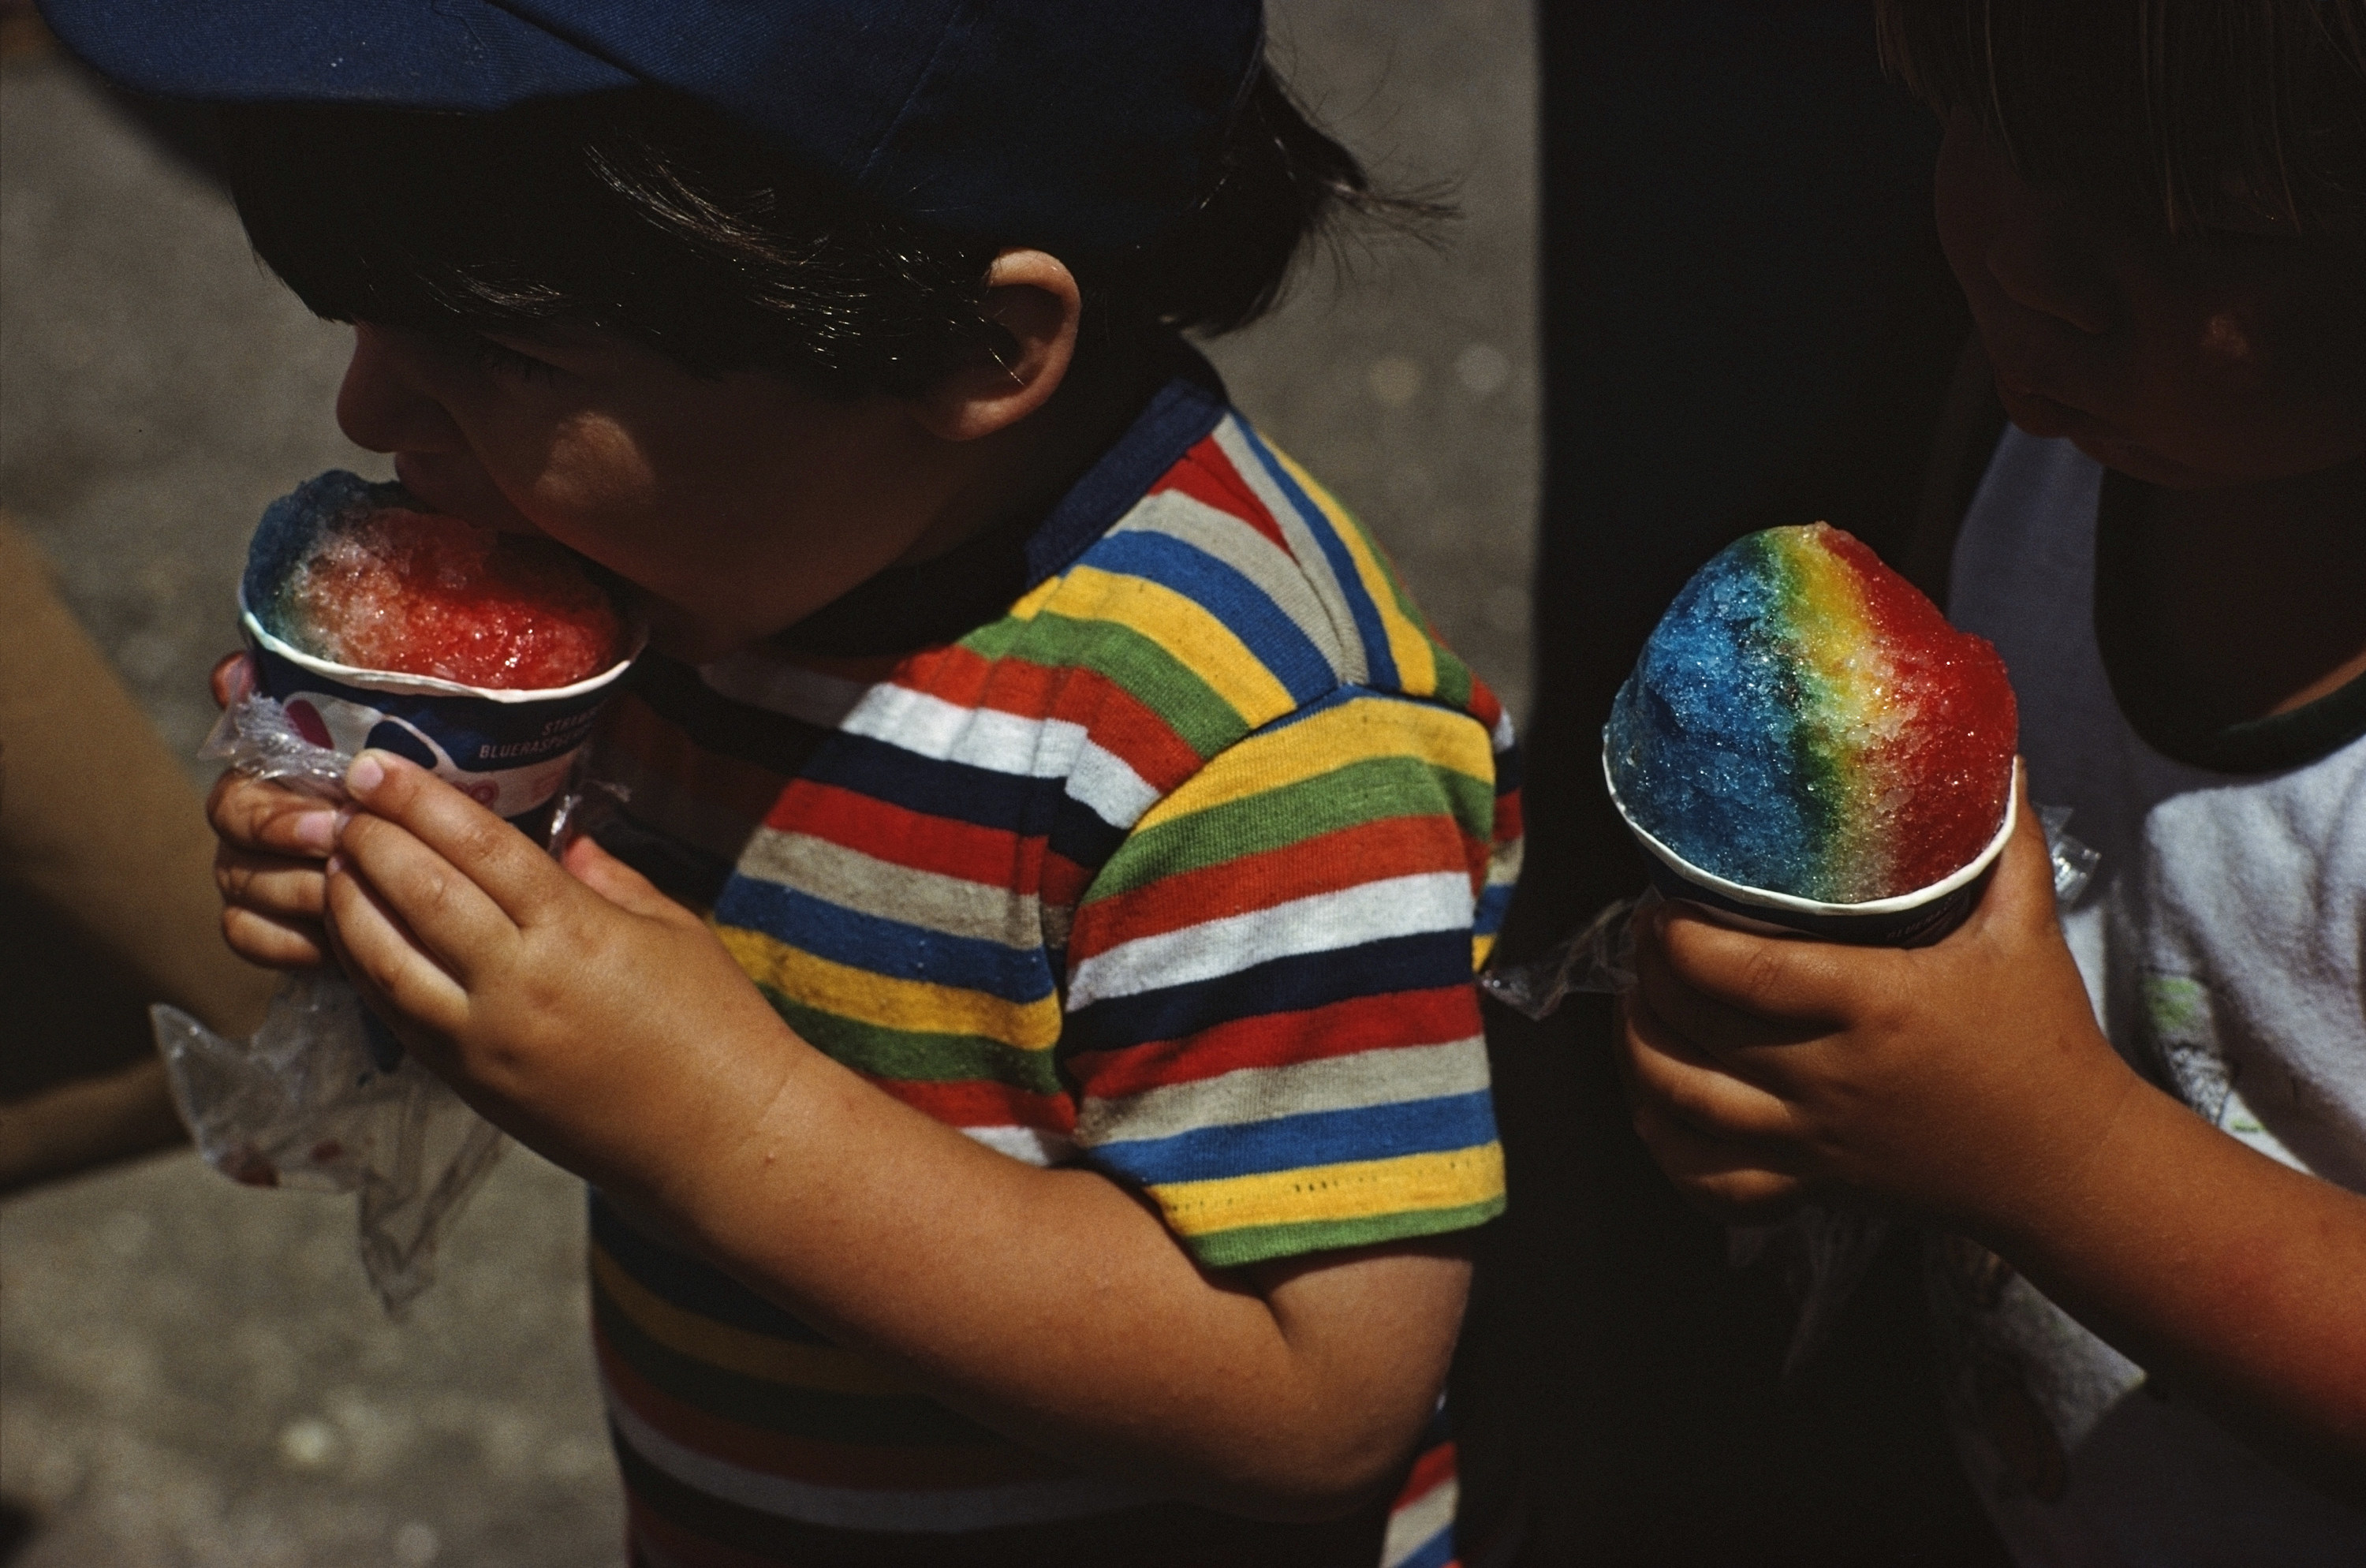 Two children hold rainbow colored snow cones at the county fair in Maine